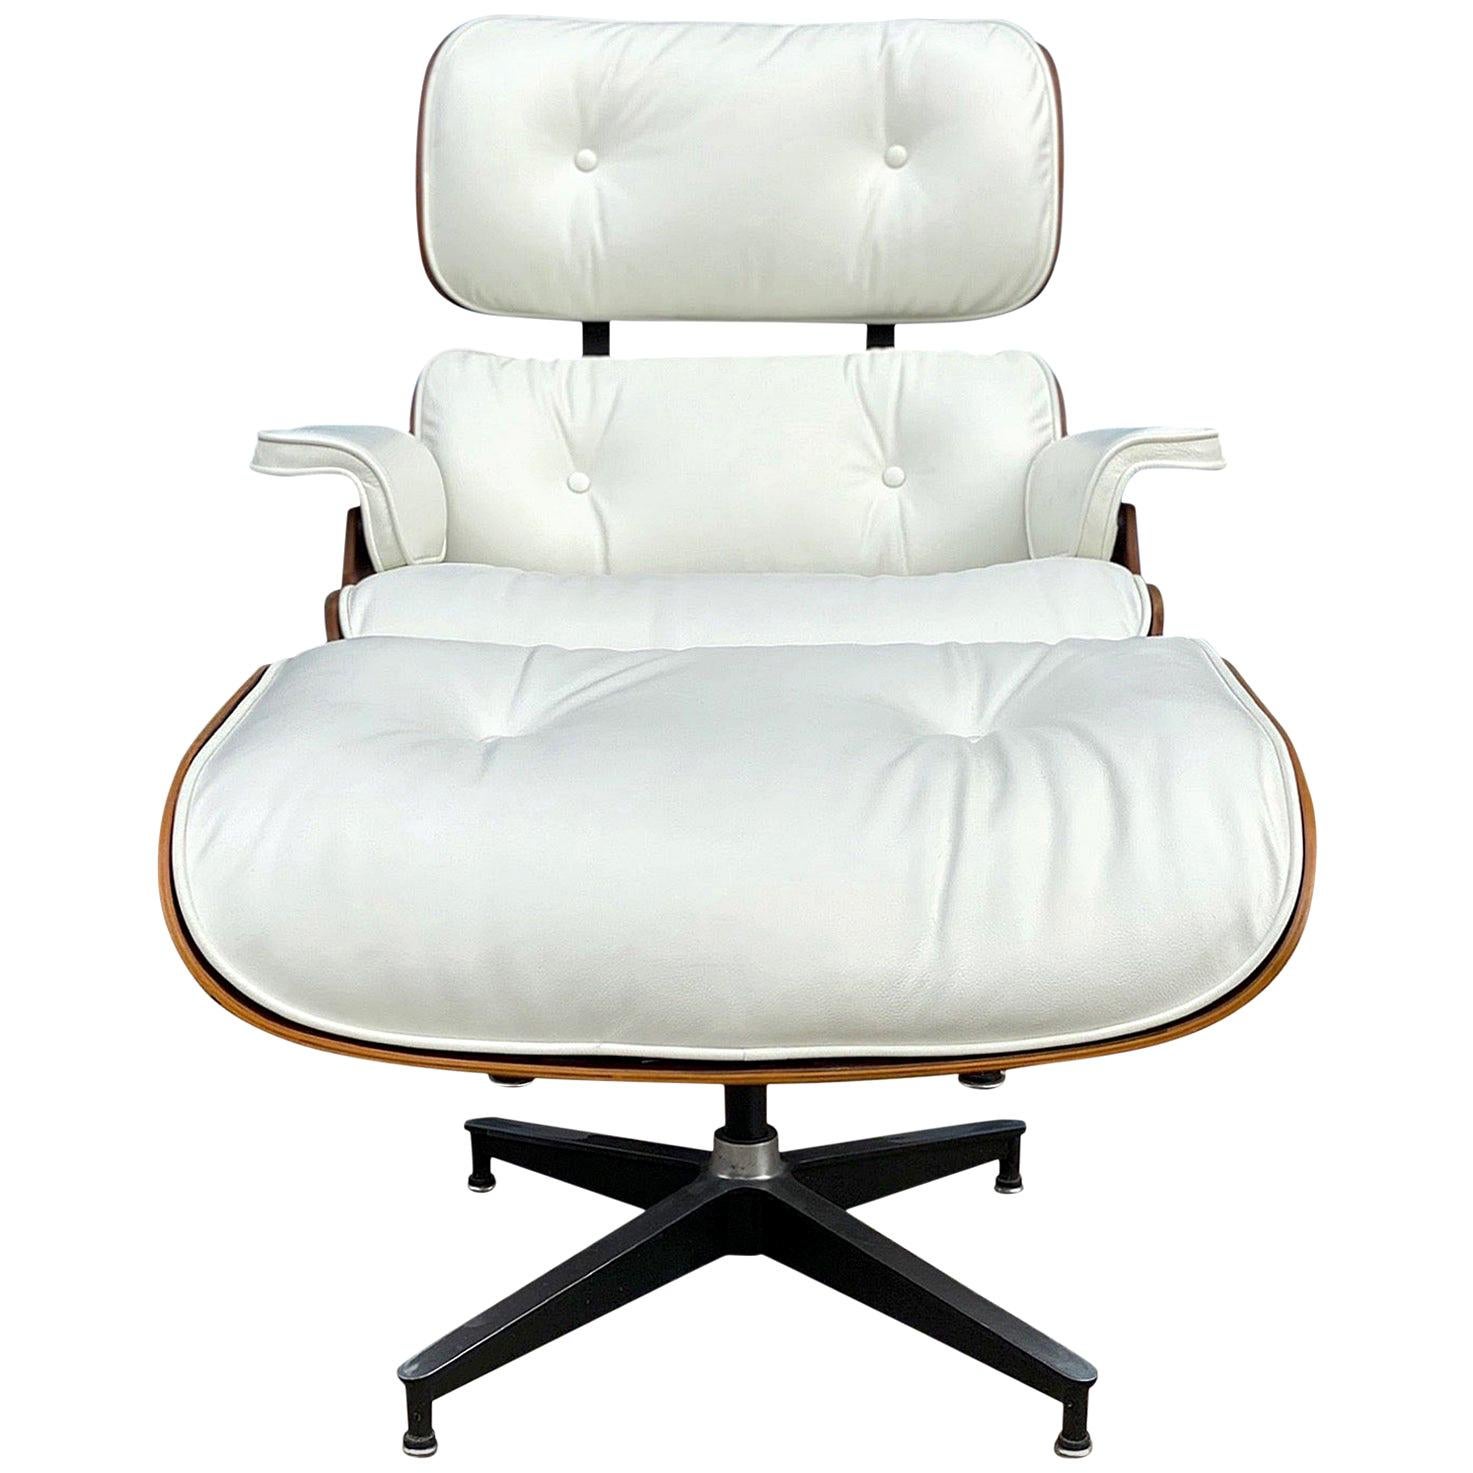 Do Eames chairs hold their value?